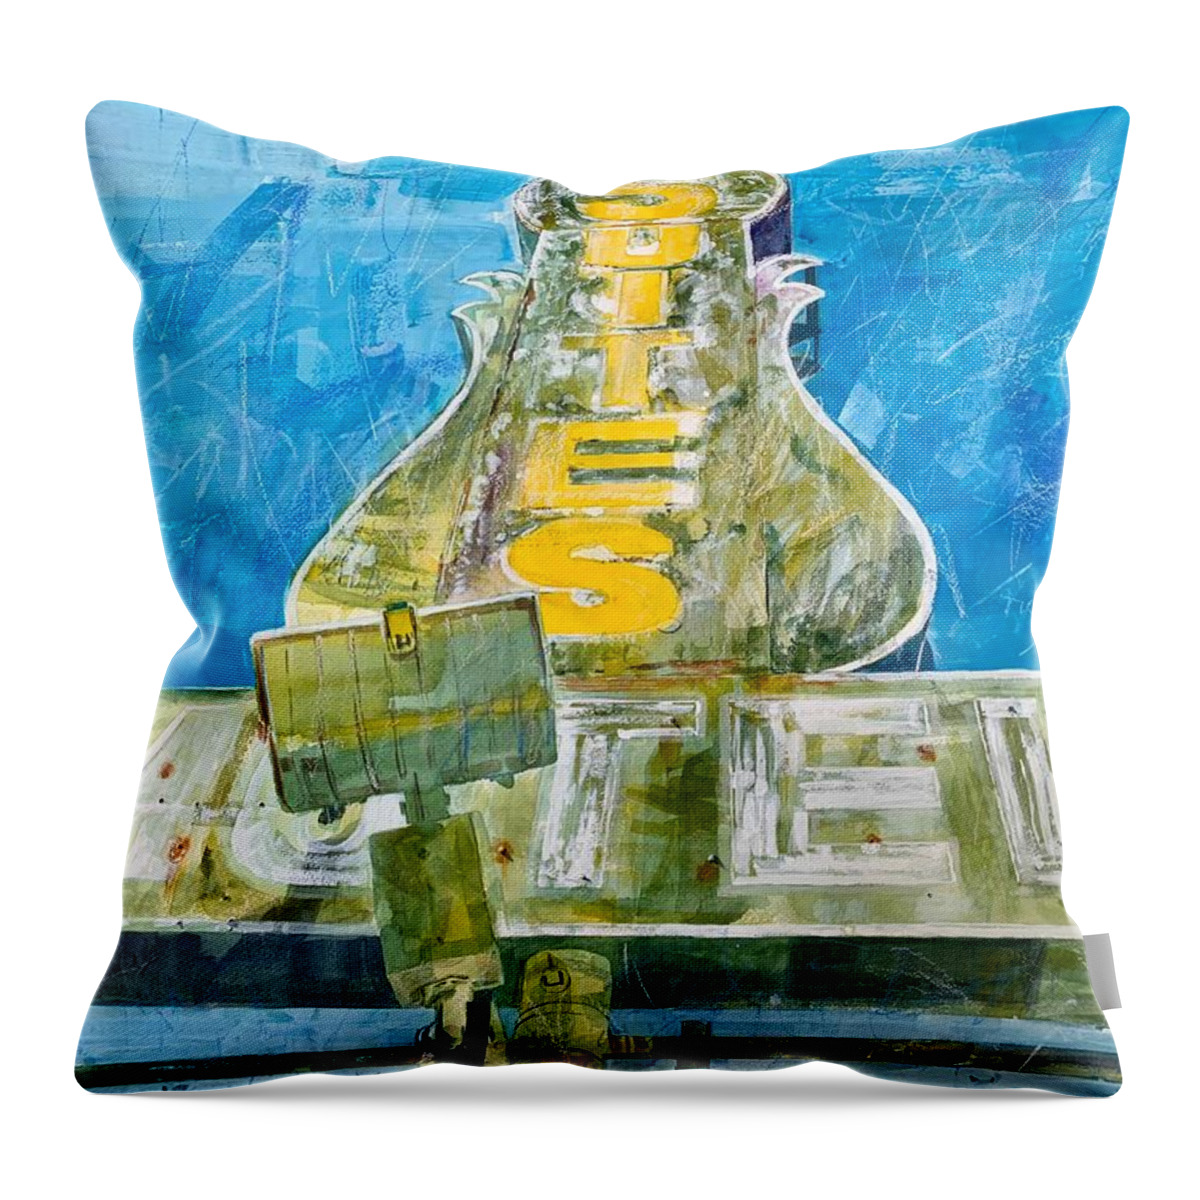 Signs Throw Pillow featuring the painting Ghost Motel by Lisa Tennant